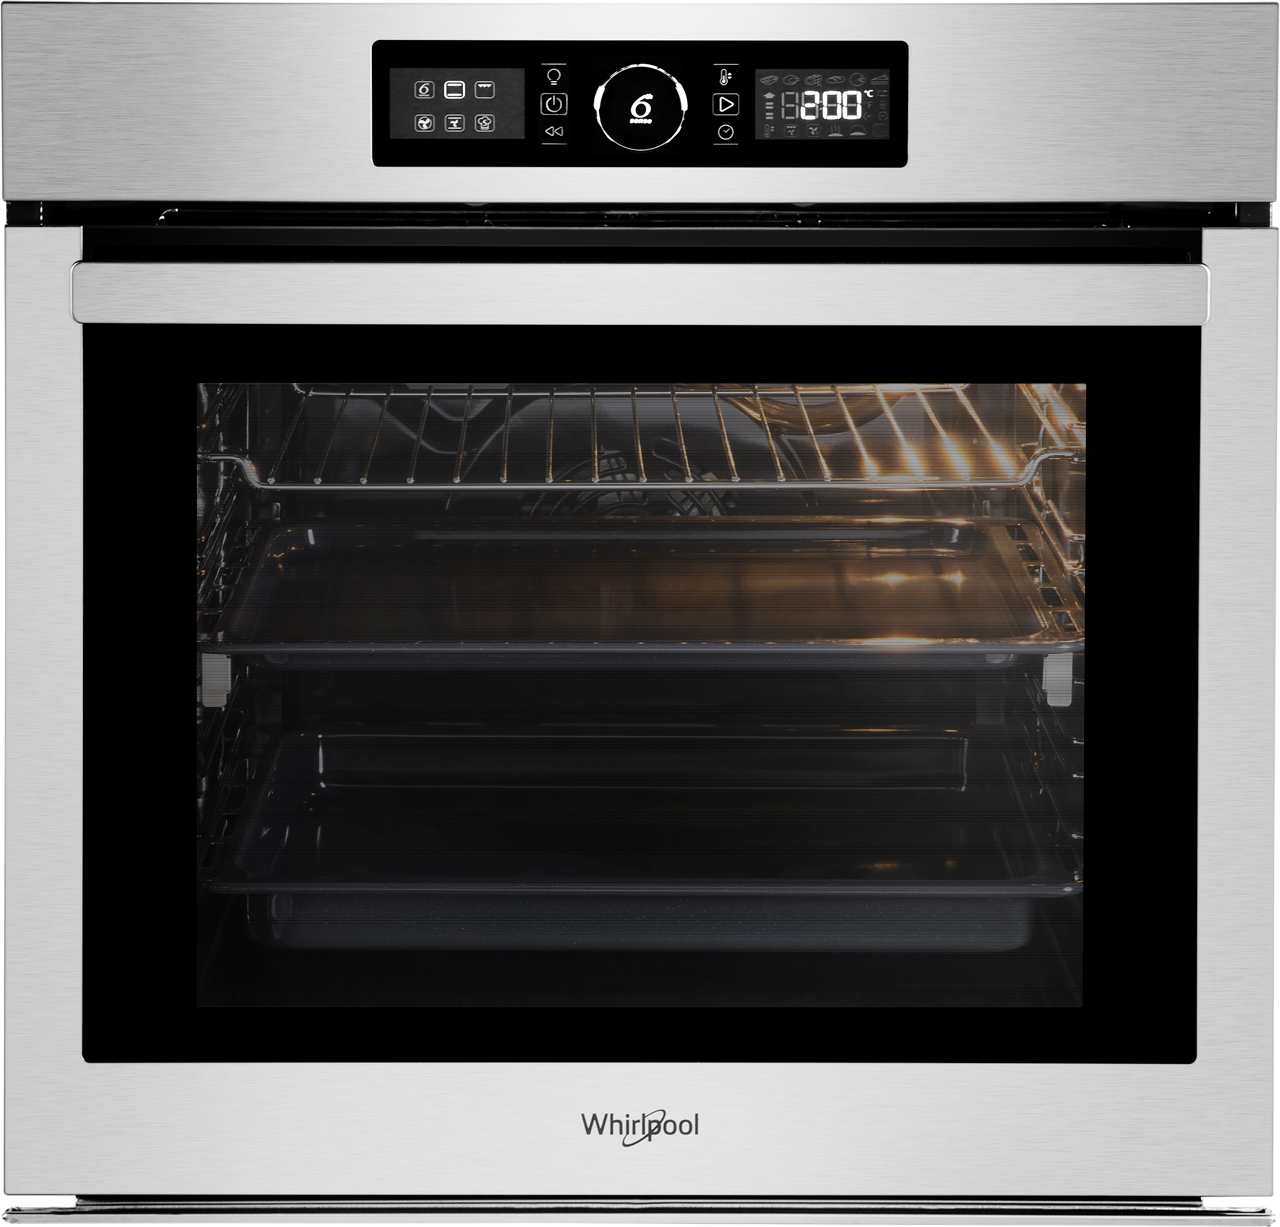 Whirlpool Absolute AKZ96270IX Built In Electric Single Oven and Pyrolytic Cleaning - Stainless Steel - A+ Rated, Stainless Steel